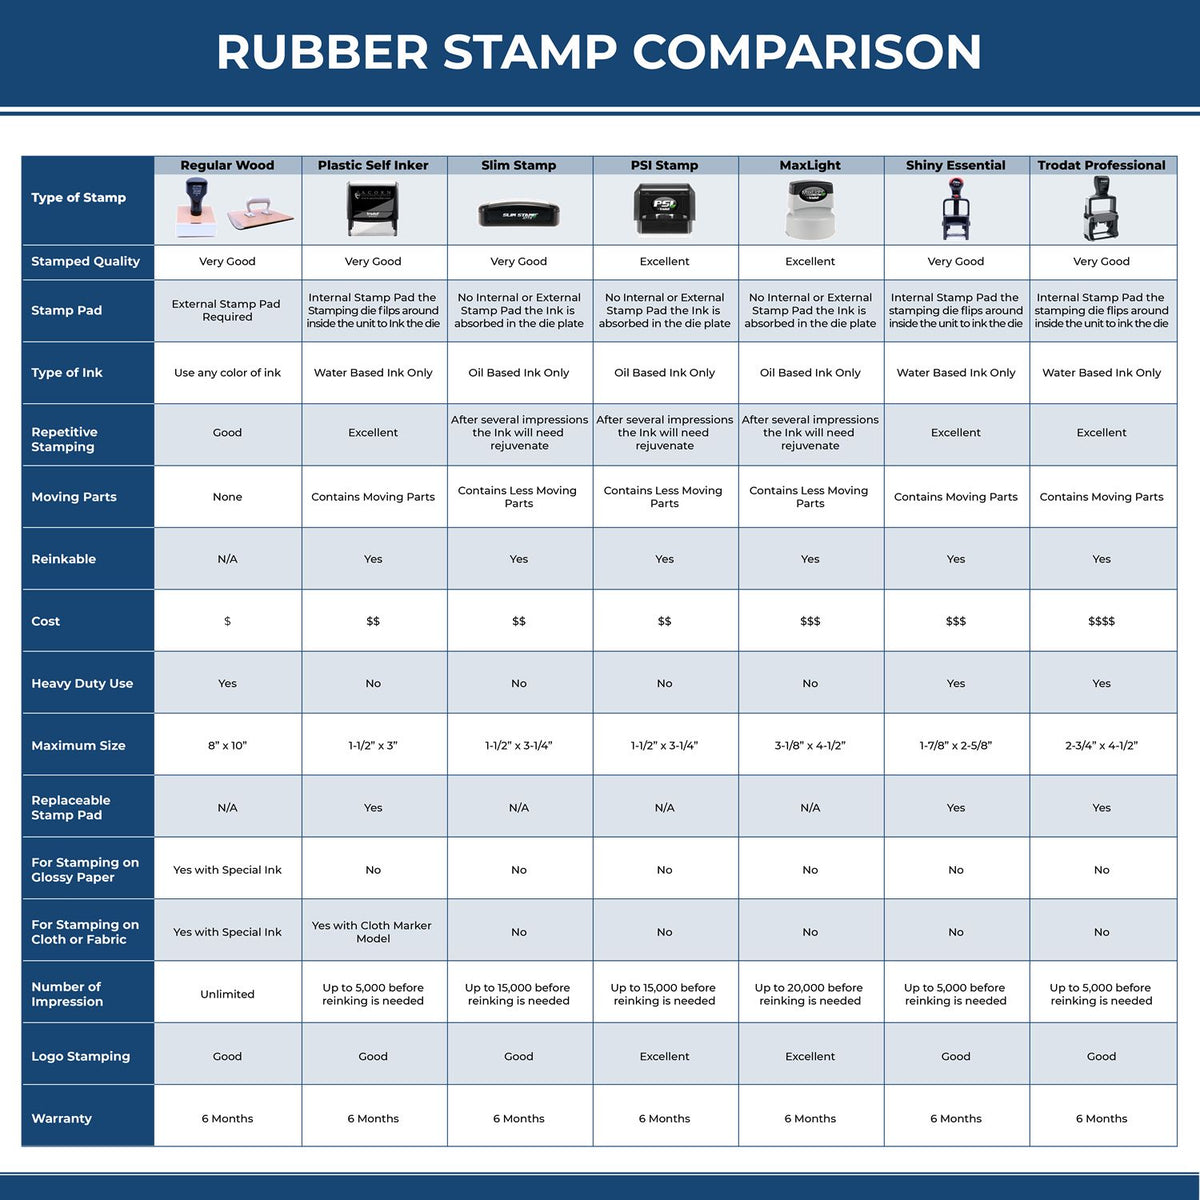 Large Red Credit Rubber Stamp 4501R Rubber Stamp Comparison